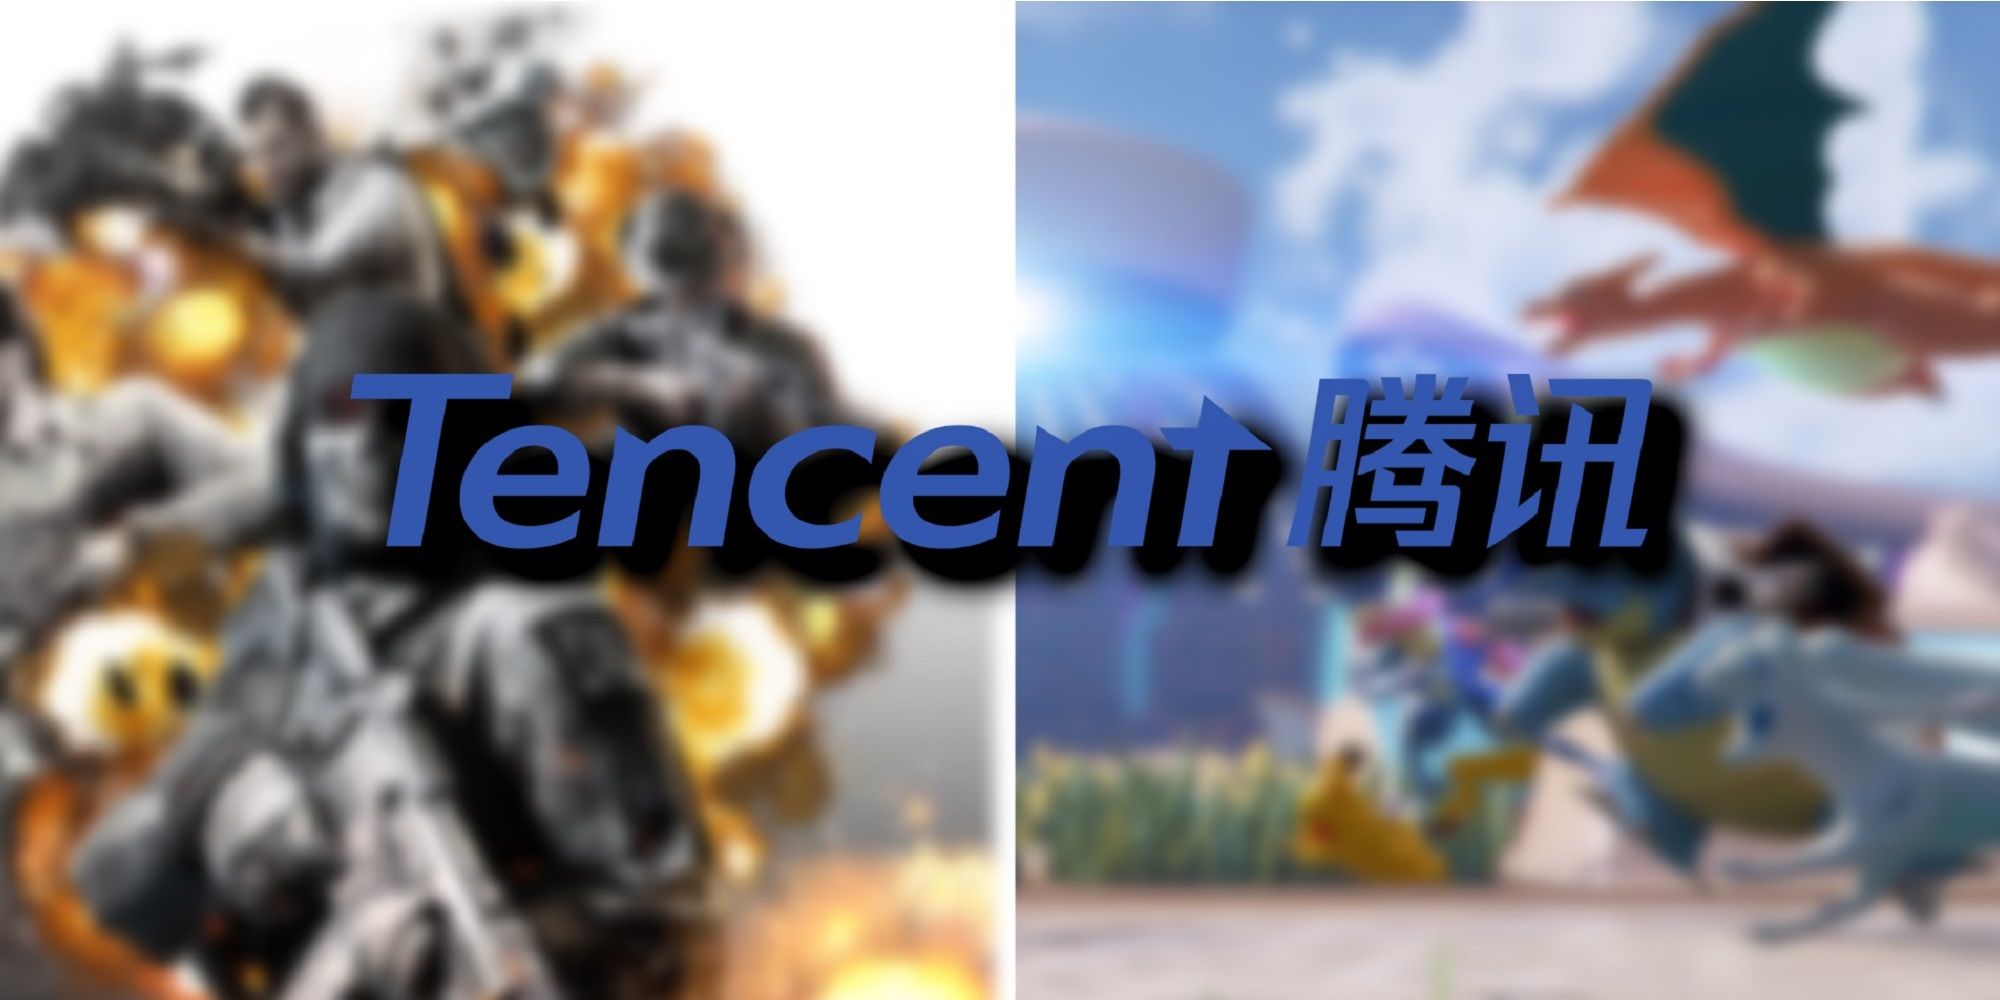 Tencent CEO Acquire More AAA Partners